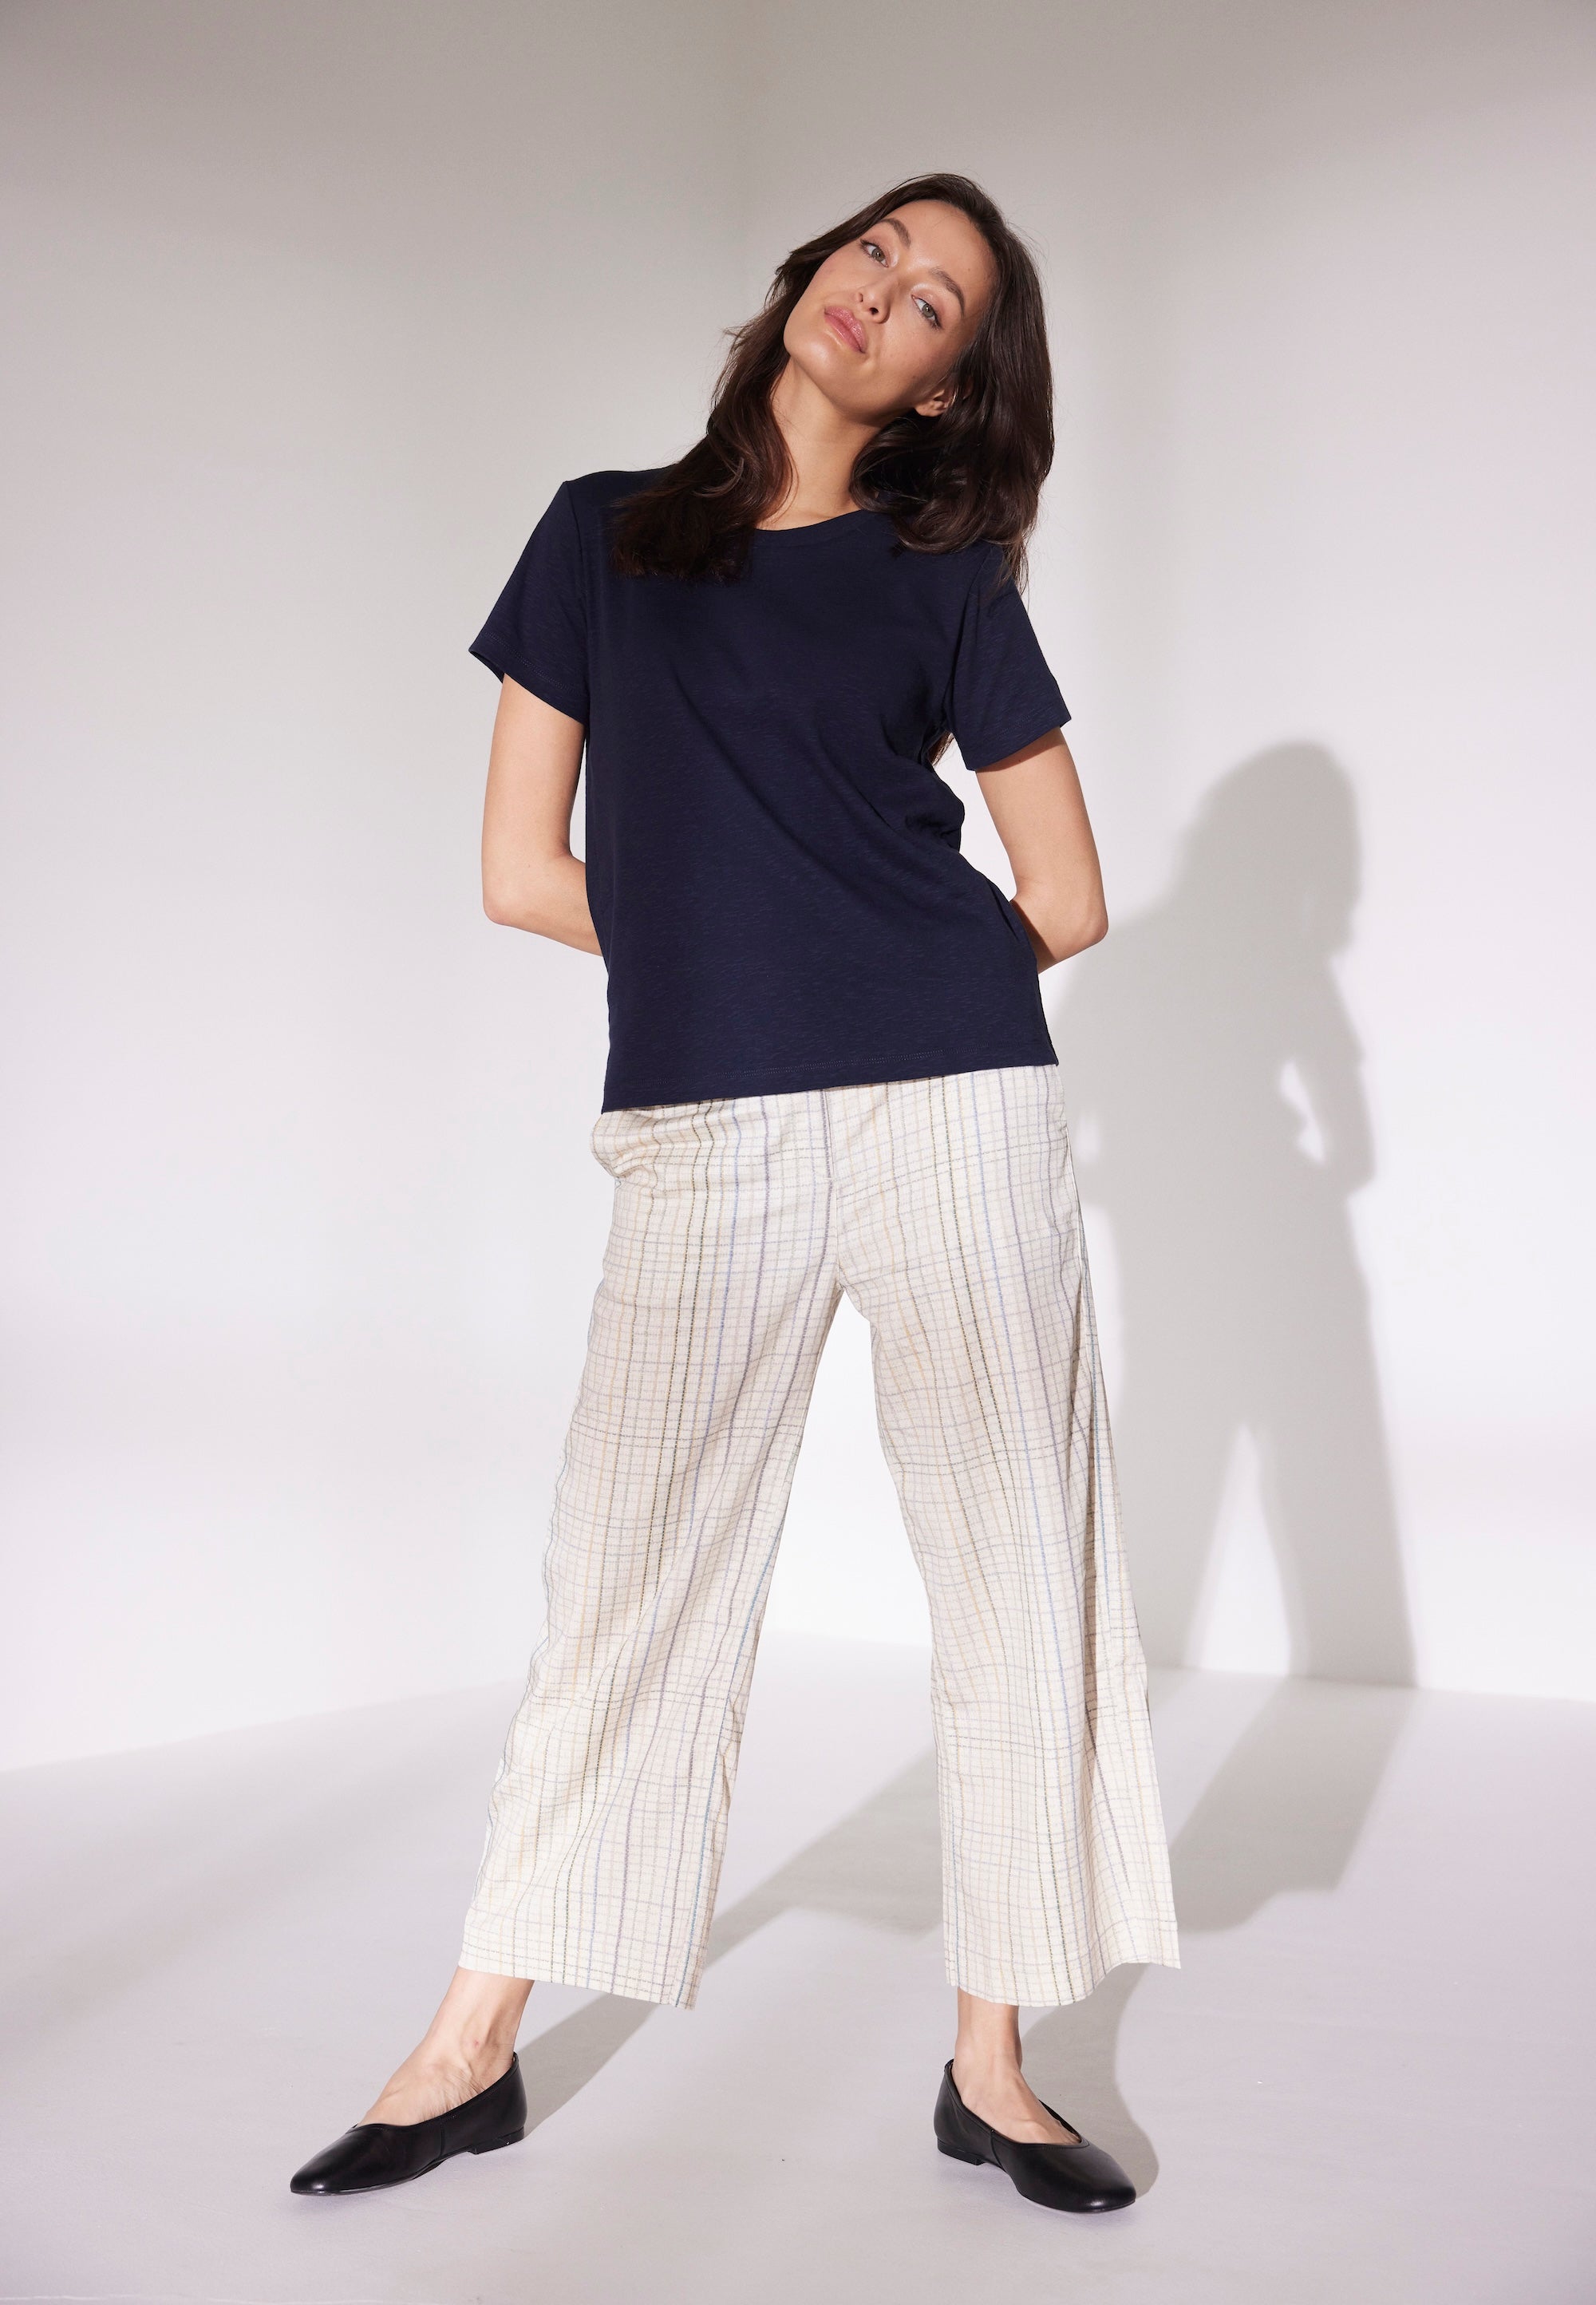 LAURIE Hilde Loose Crop Trousers LOOSE 13043 Birch Check Print